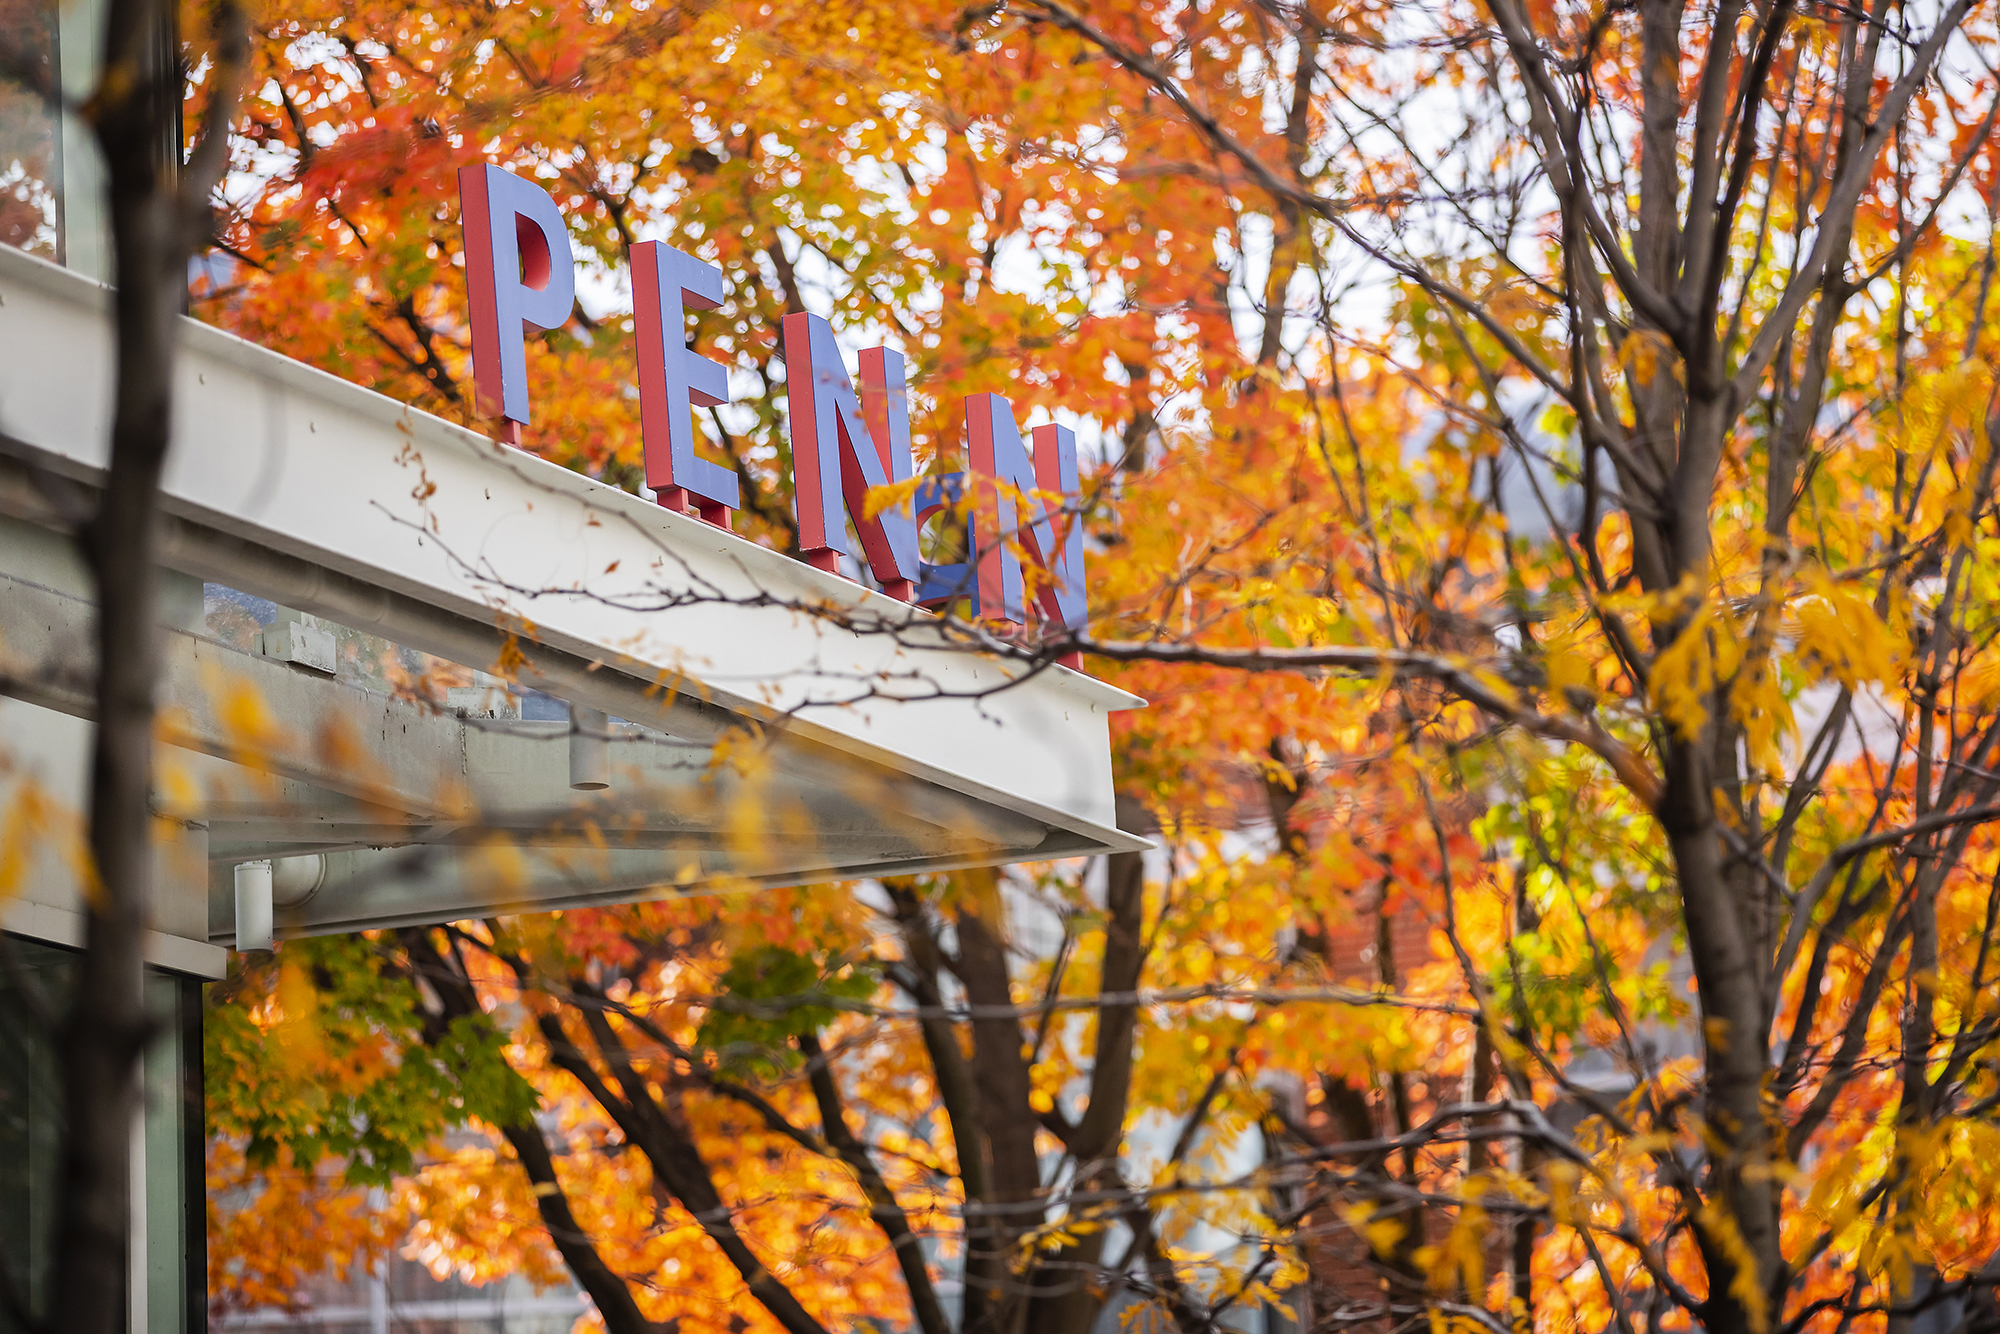 PENN sign on top of building entrance framed by surrounding autumn leaves.